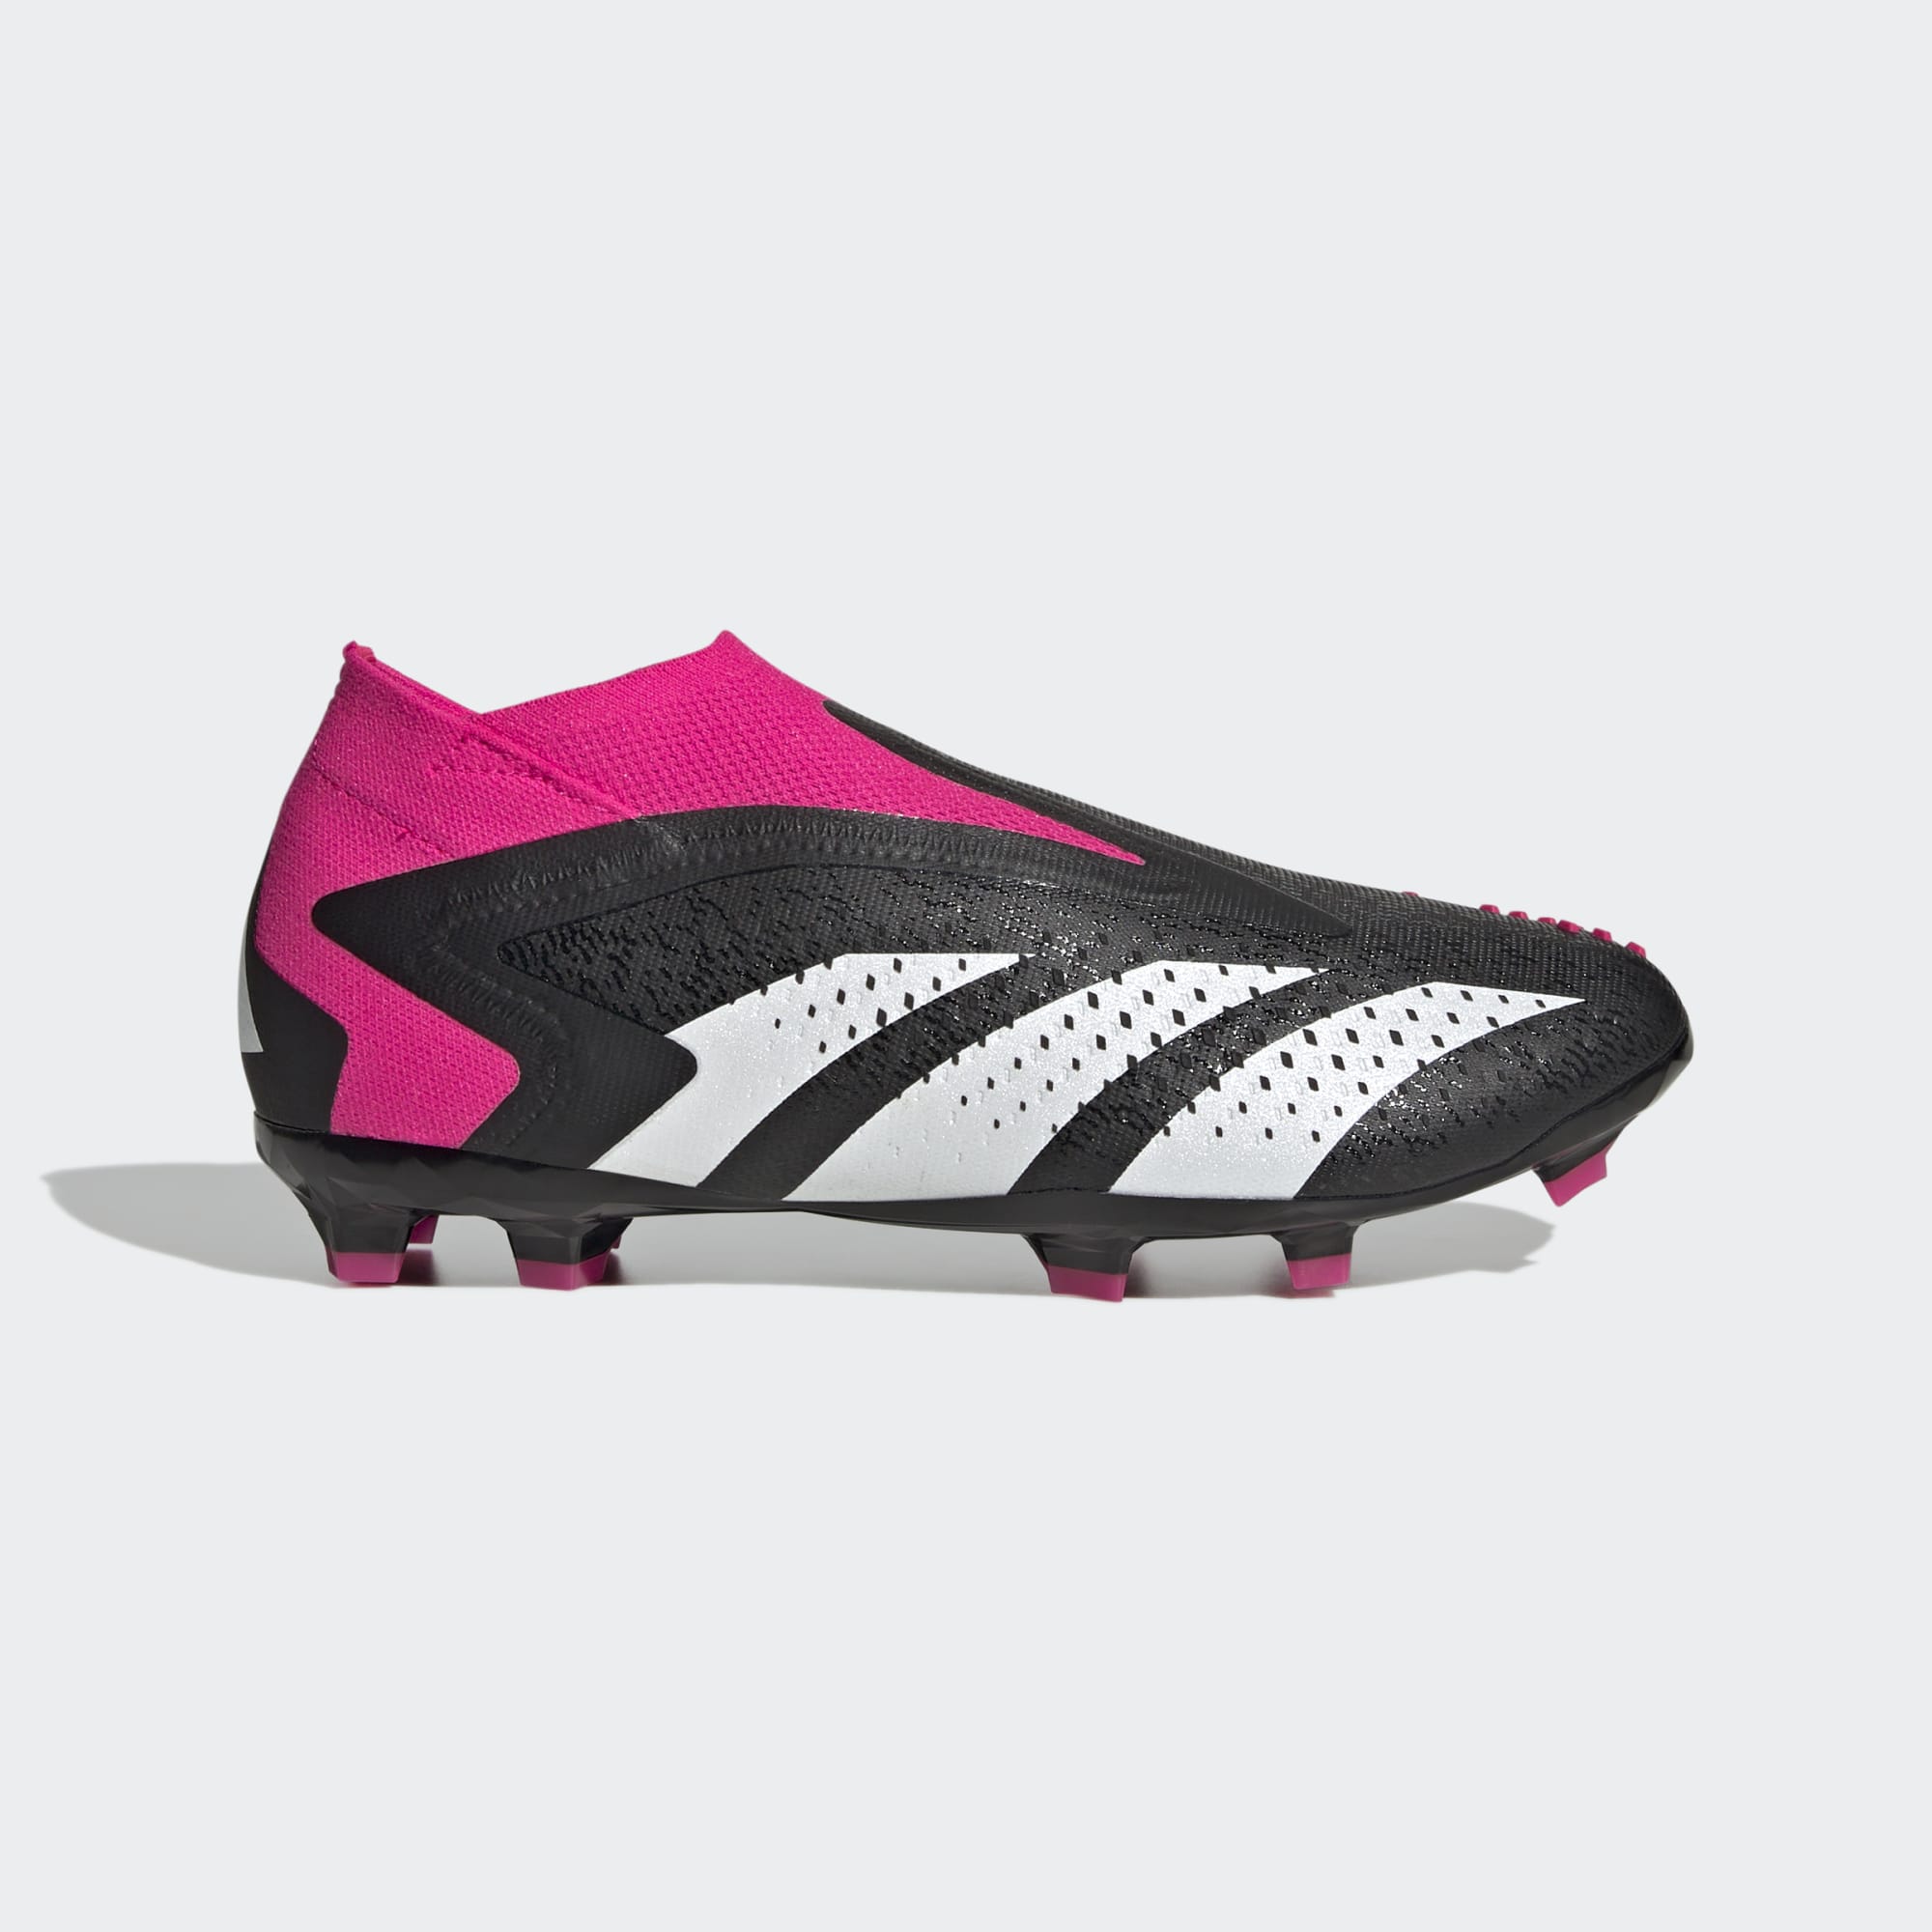 adidas PREDATOR ACCURACY+ FIRMGROUND YOUTH SOCCER CLEATS